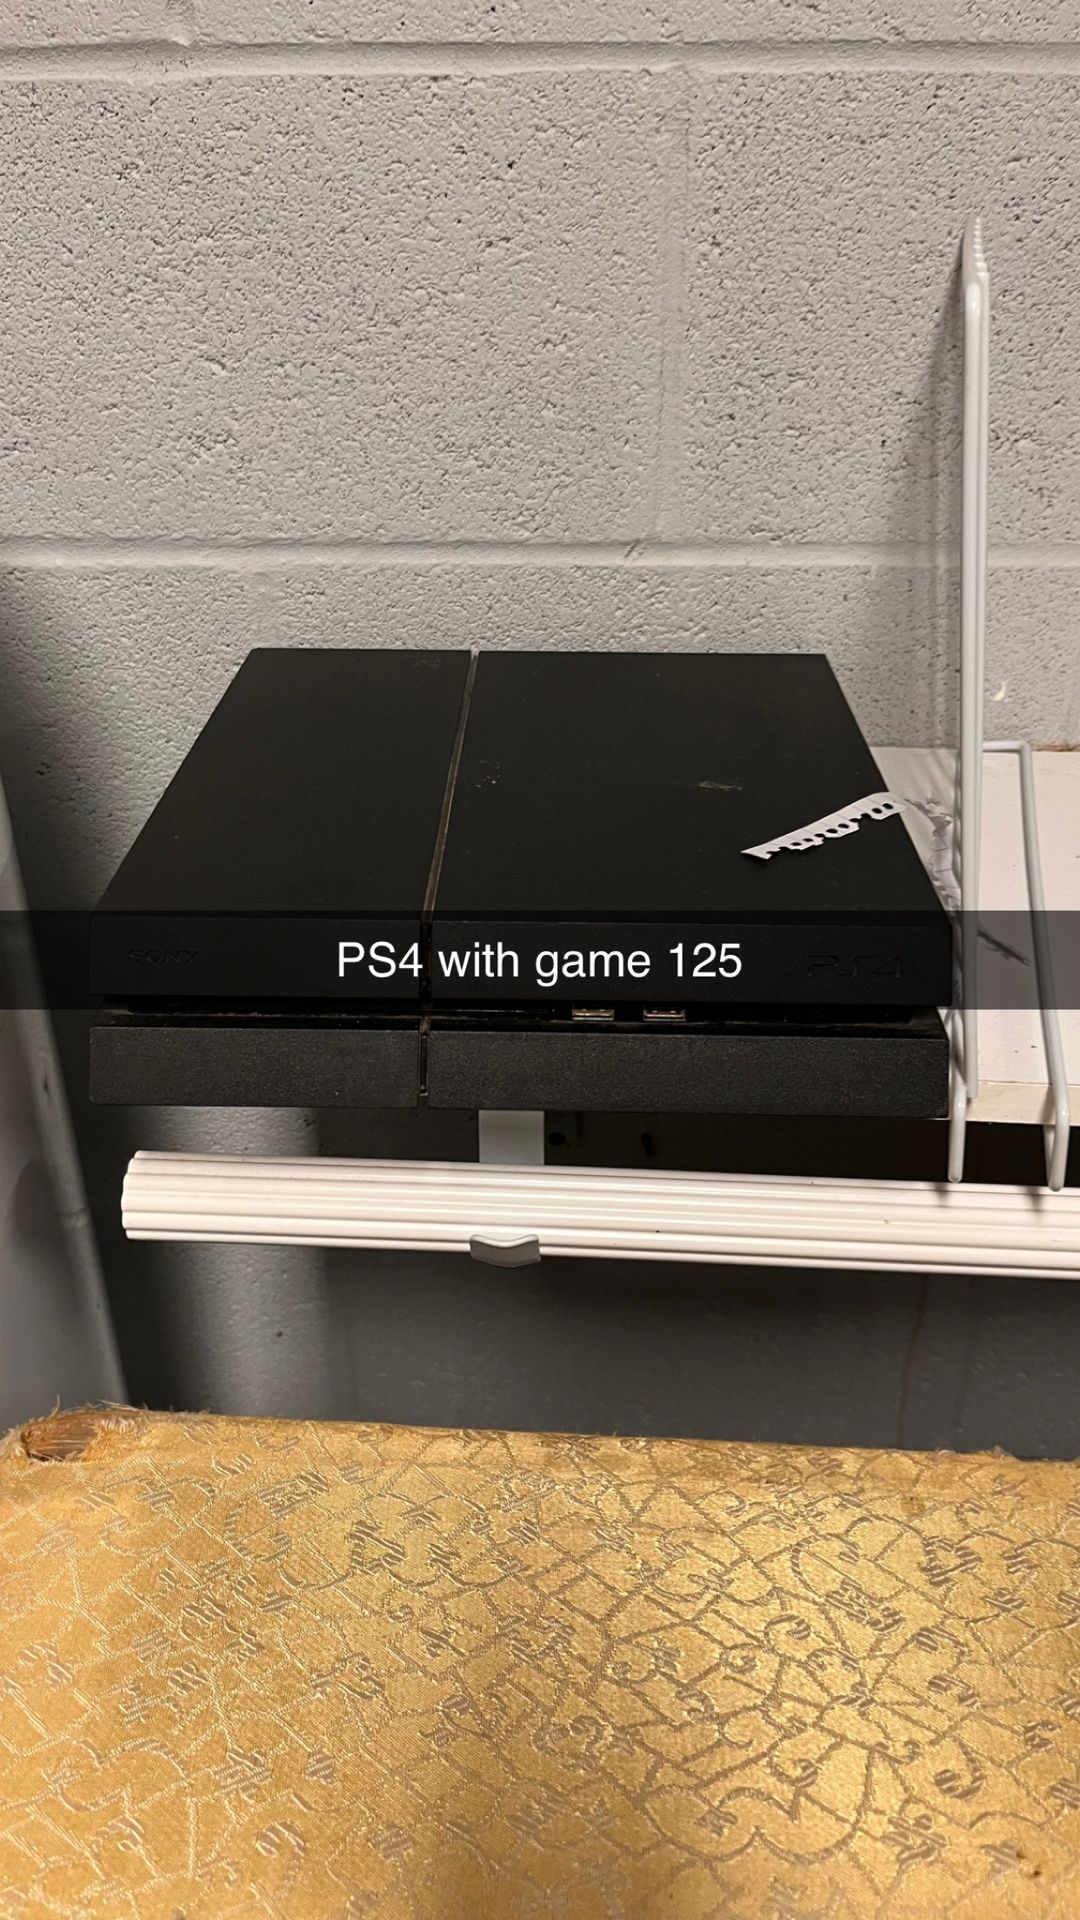 PS4 With Games And Cord